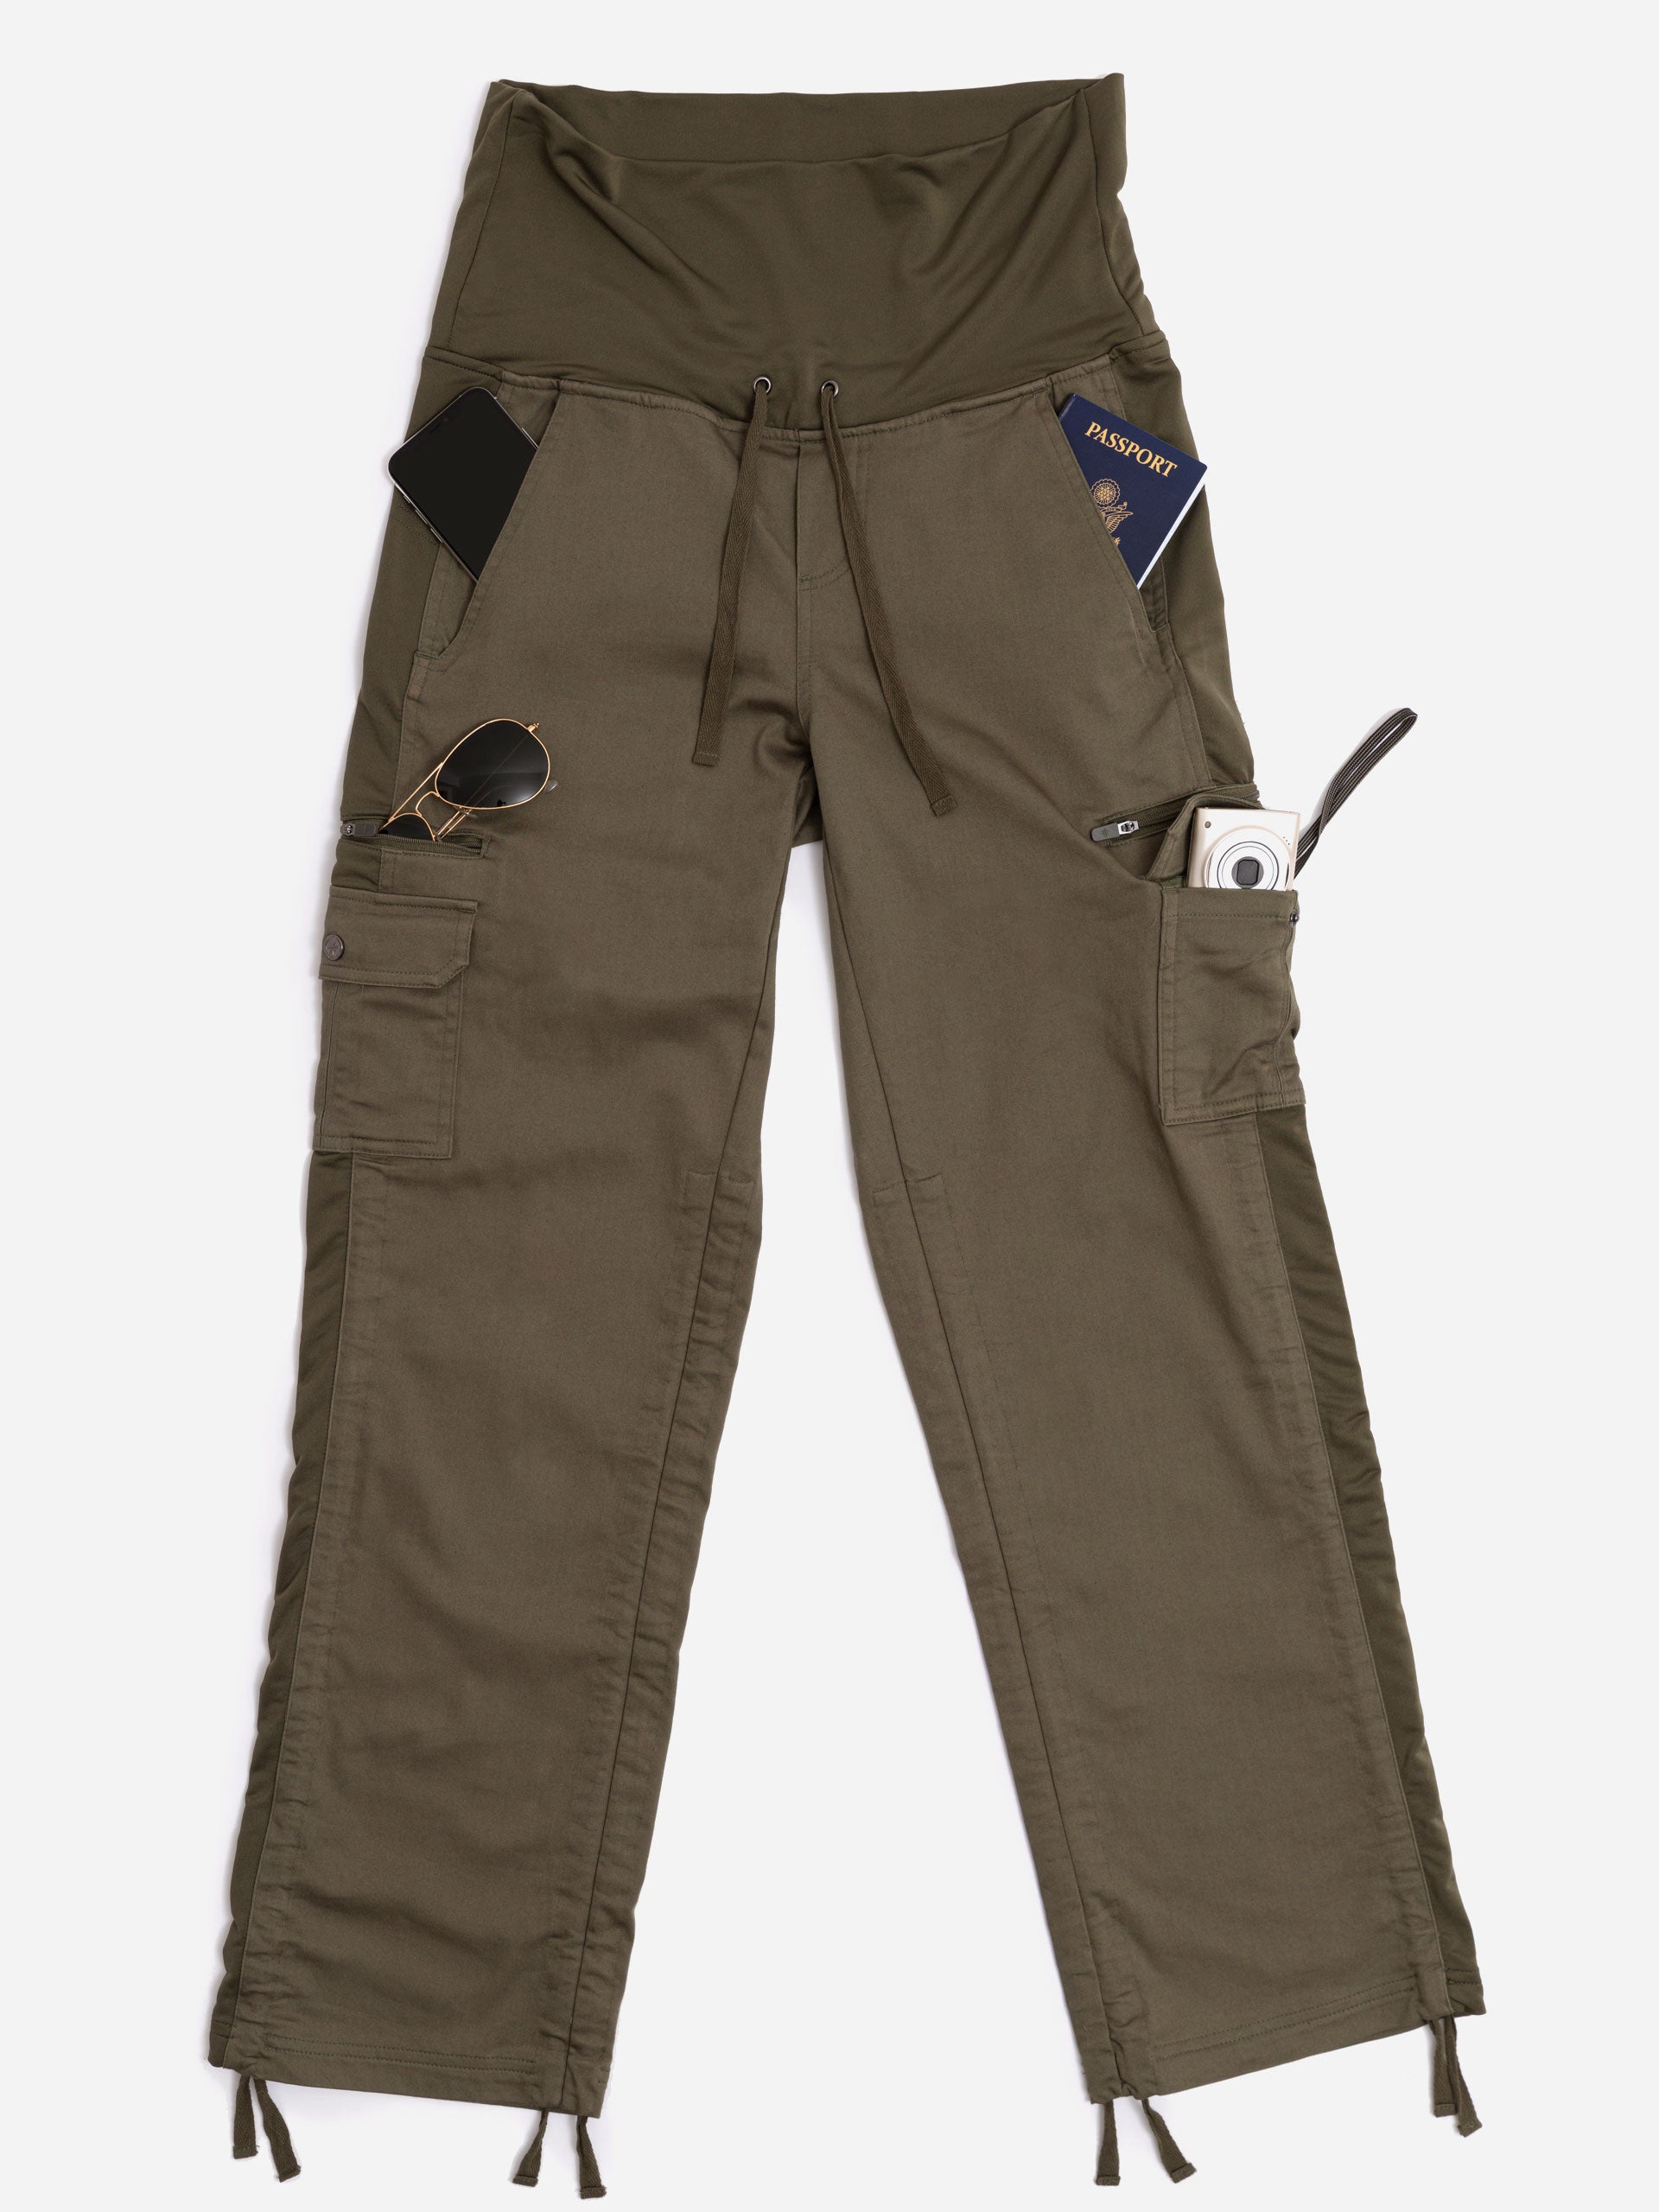 The 8 Women's Travel Pants with Pockets I Love